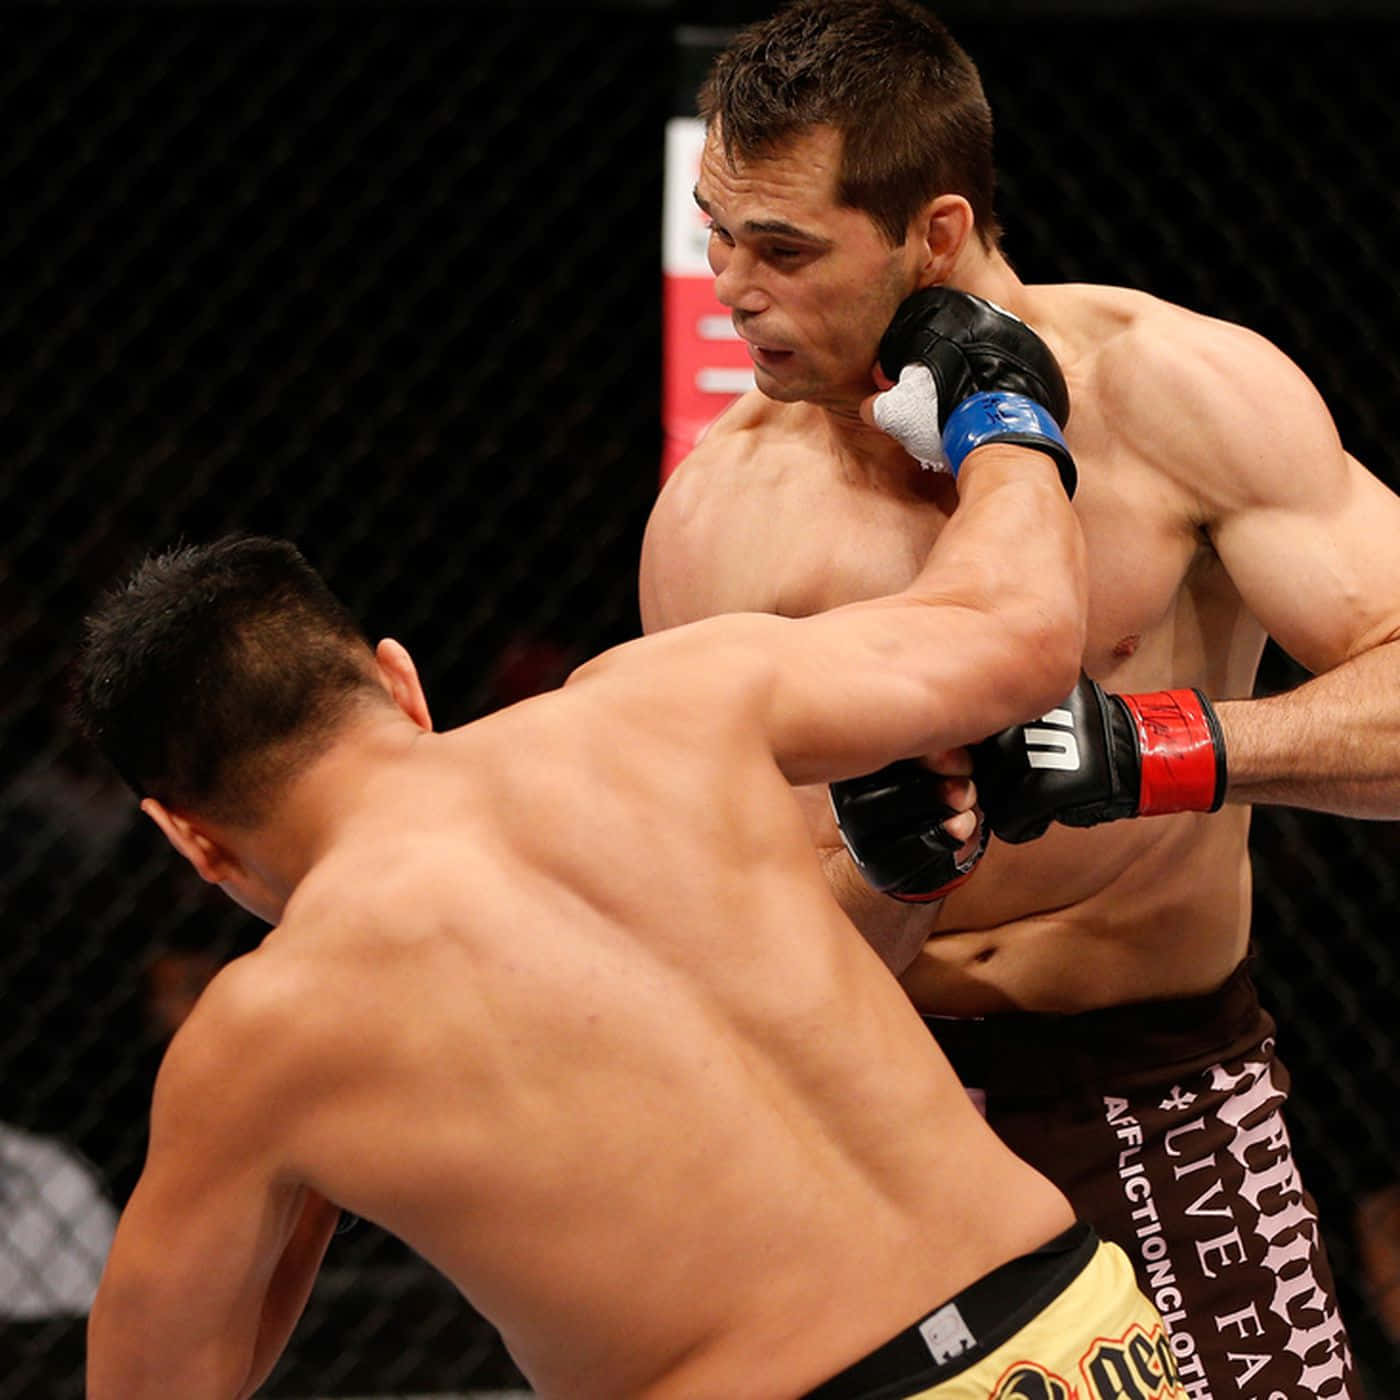 Richfranklin Versus Cung Le Translates To 